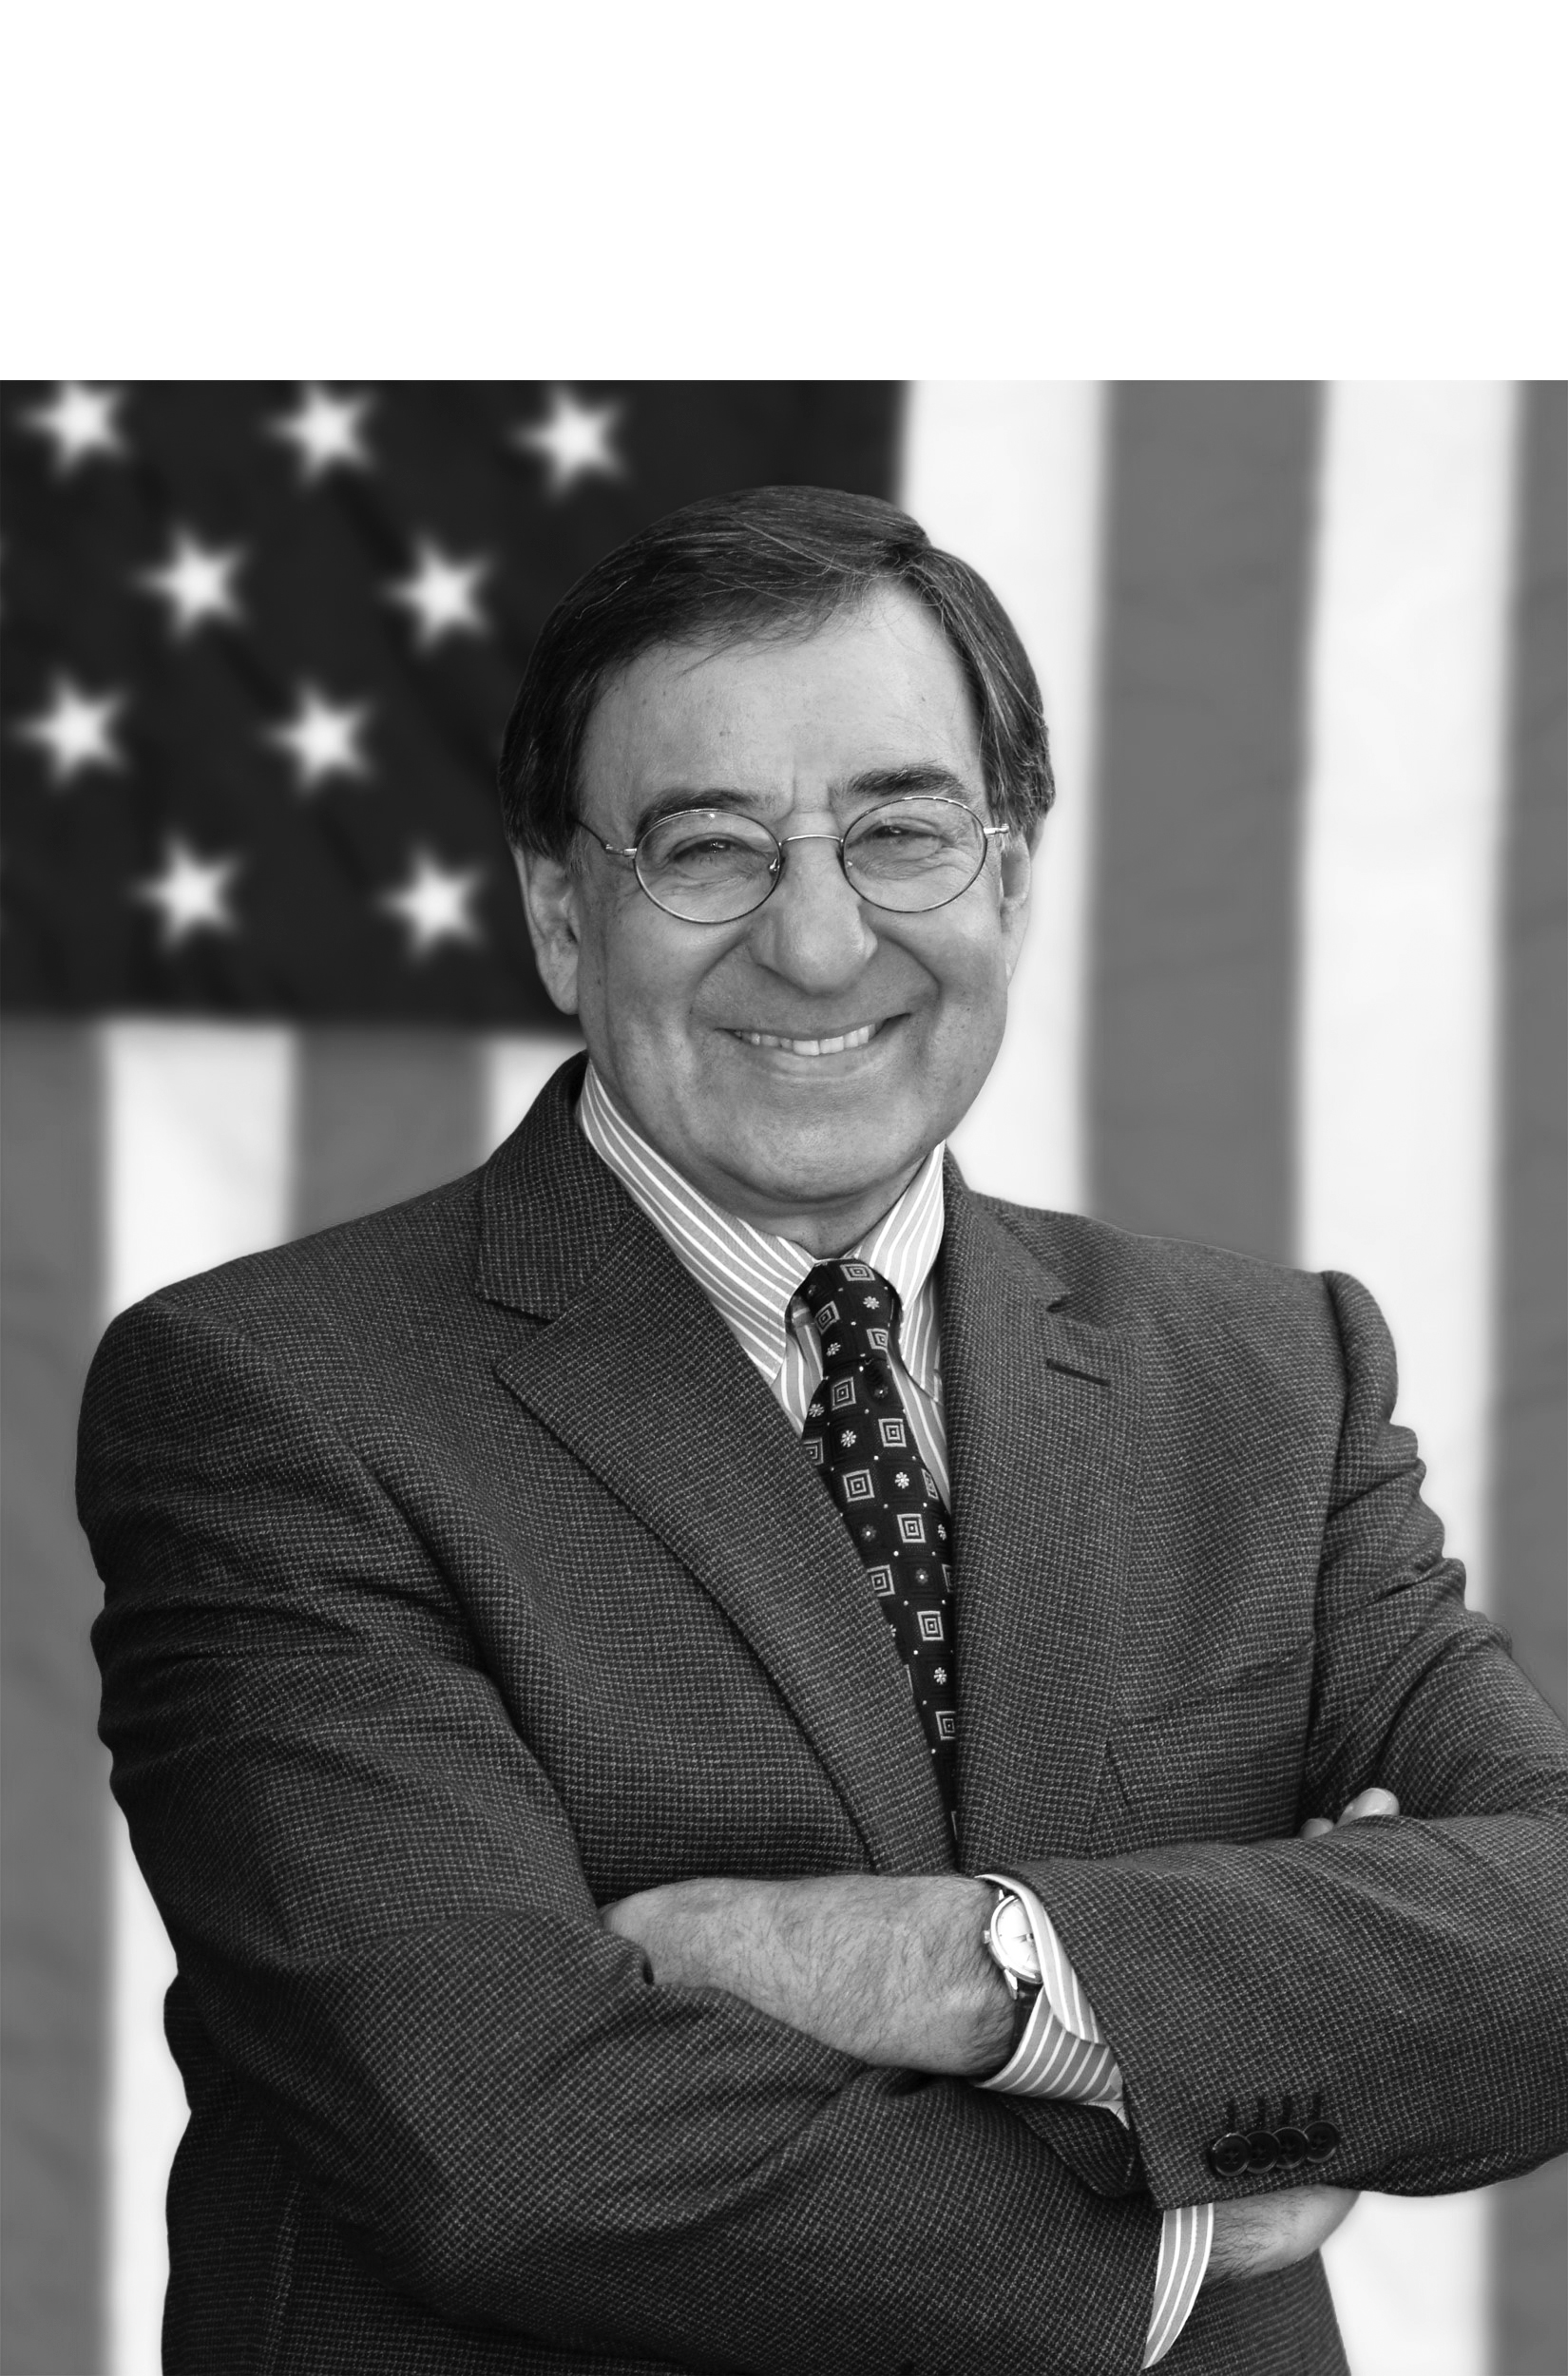 Leon Panetta poses with a smile in front of the American flag.